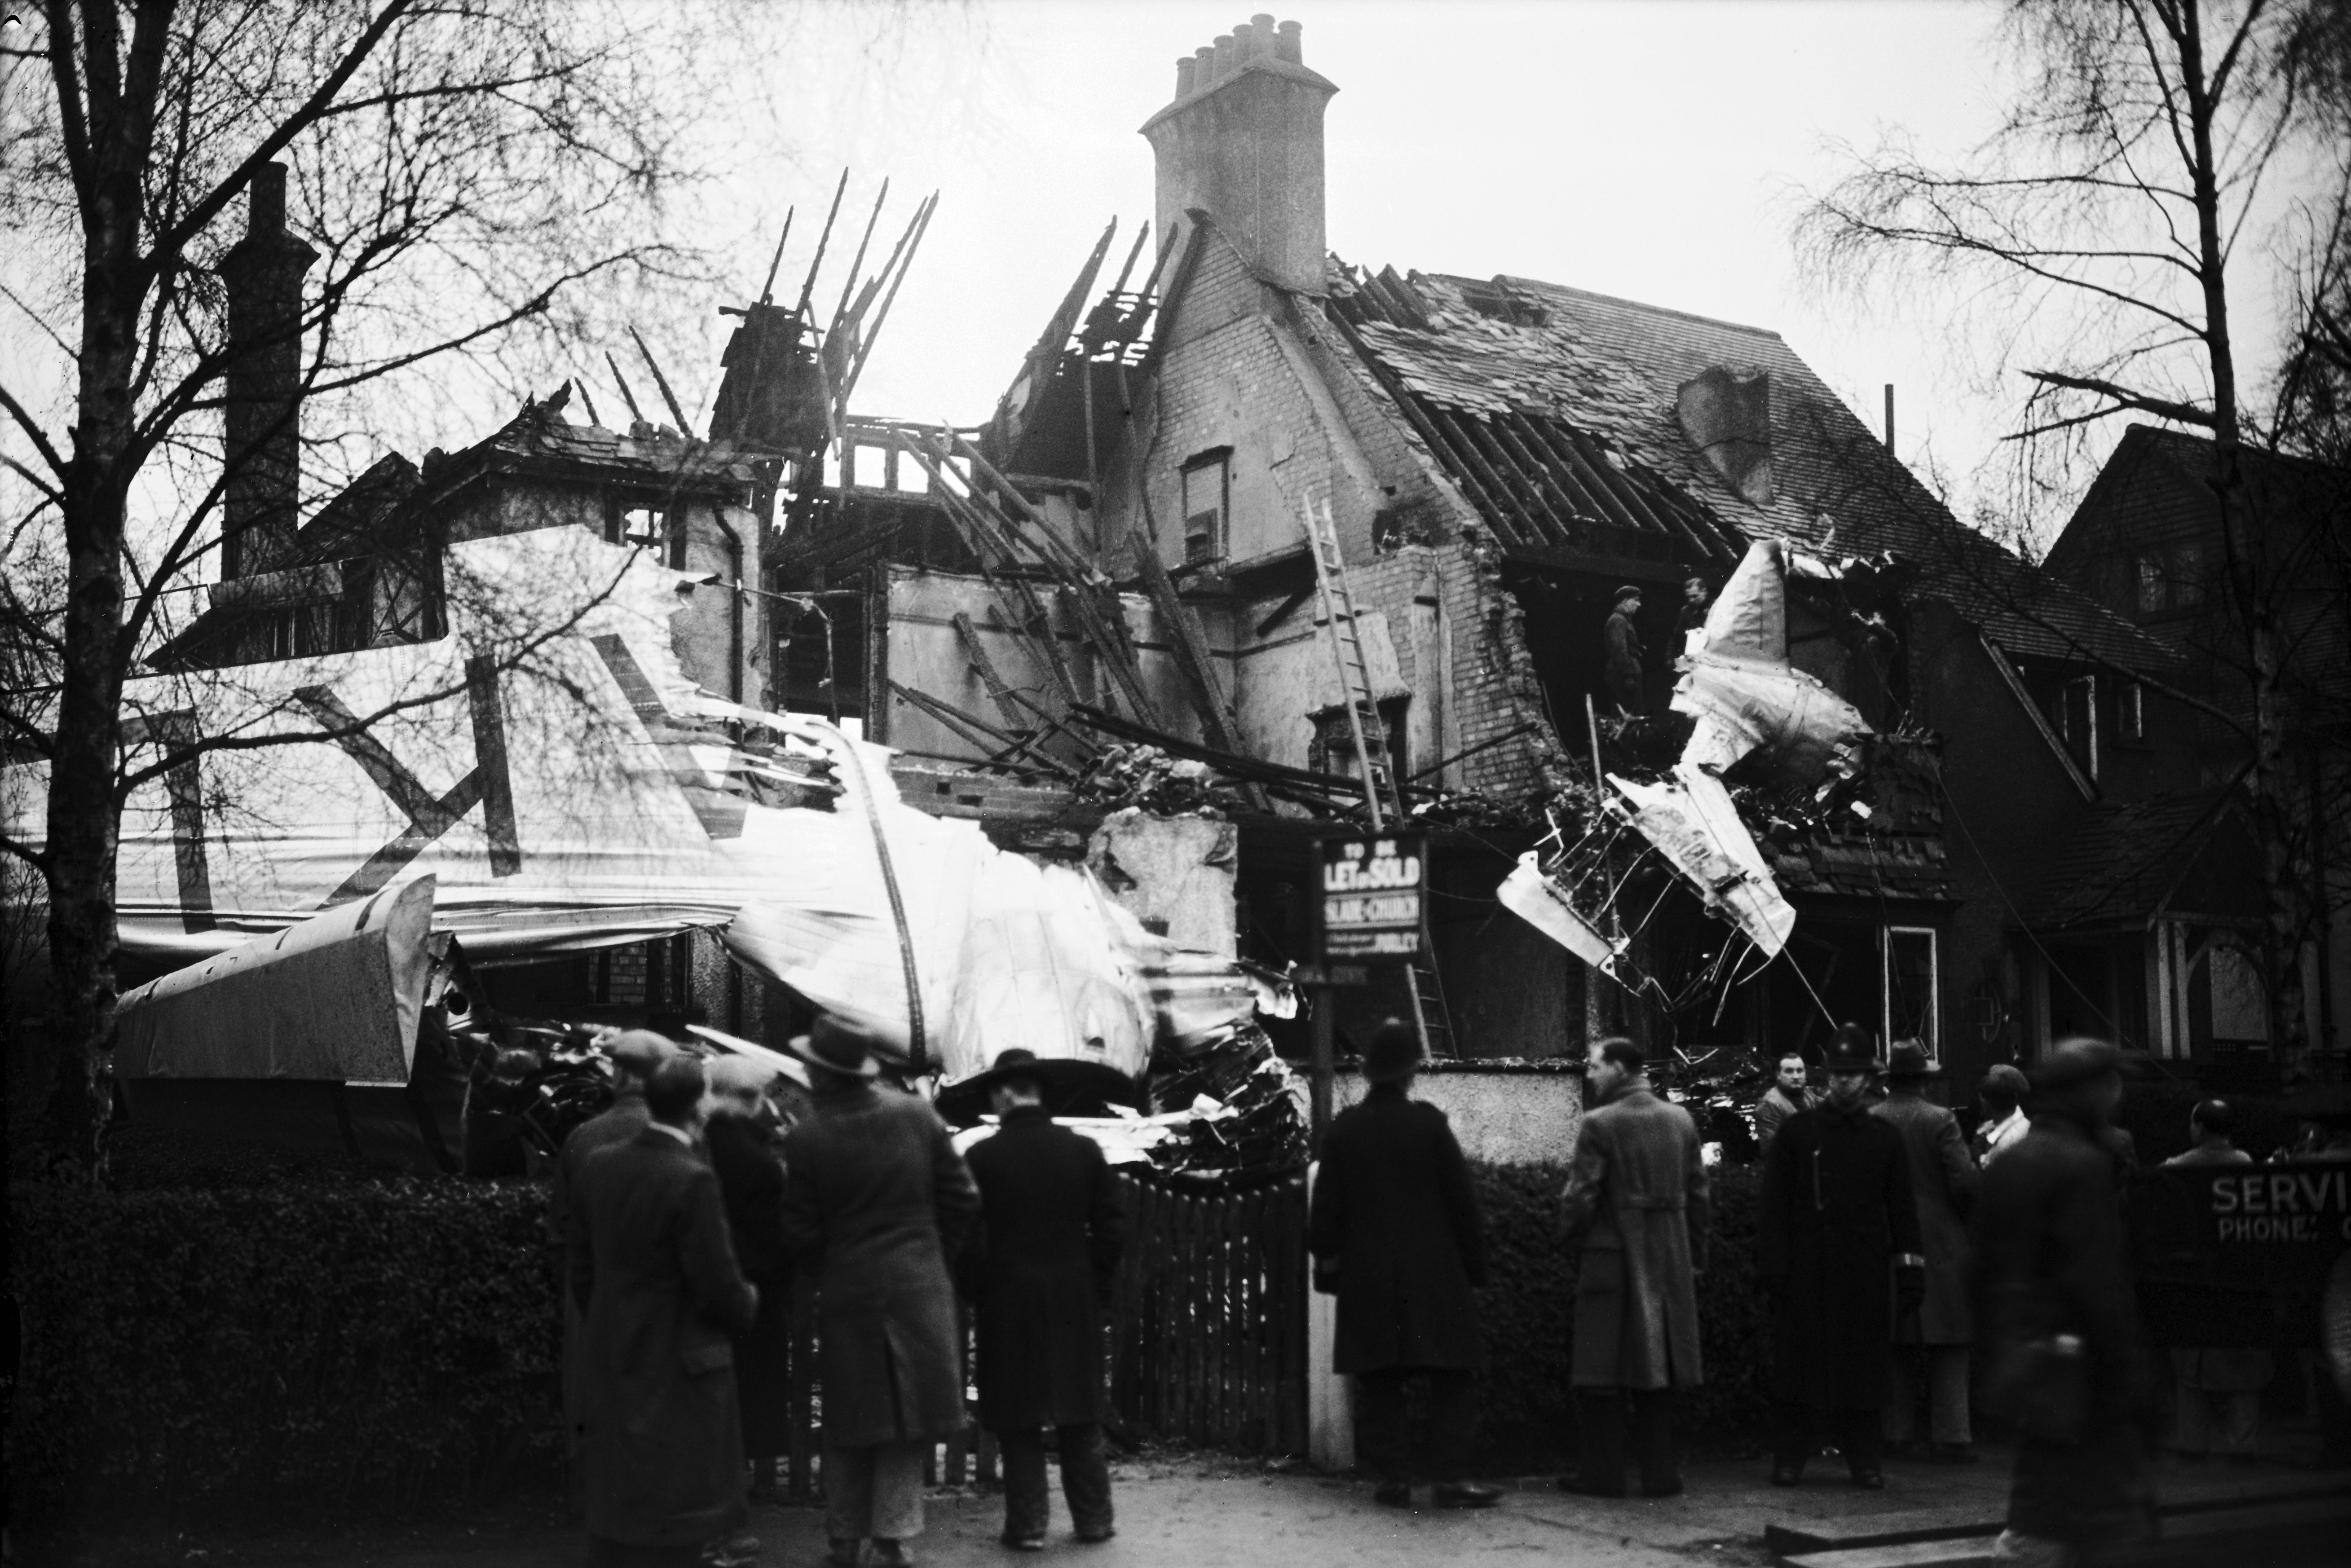 The house in Purley where the KLM DC-2 crashed